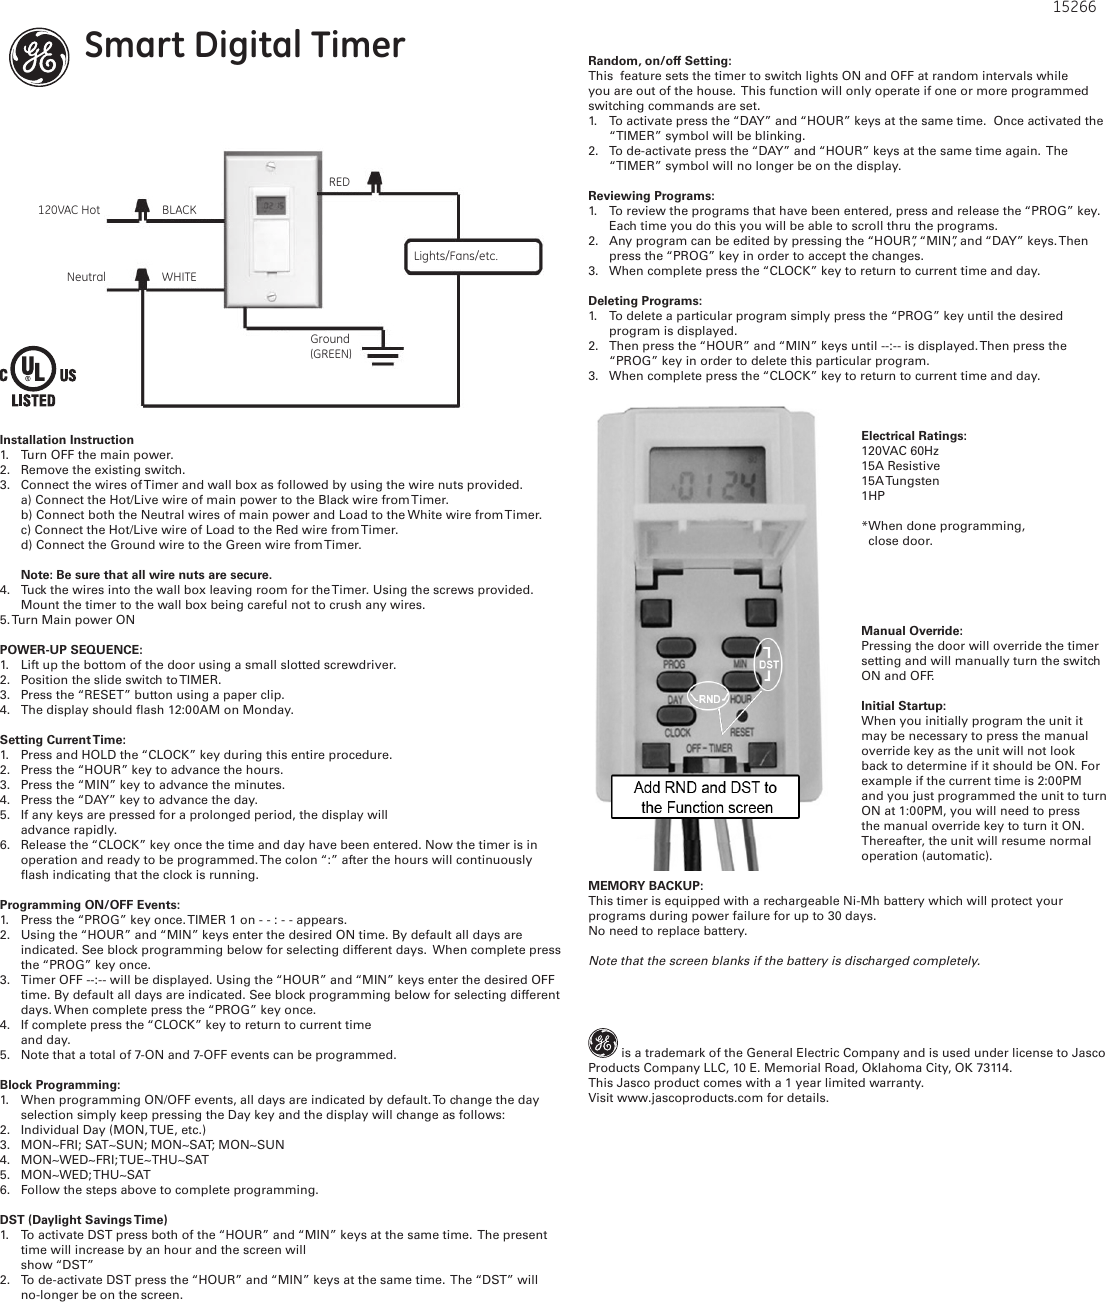 Page 1 of 2 - Ge-Appliances Ge-15266-Inwall-Digital-Timer-Owners-Manual